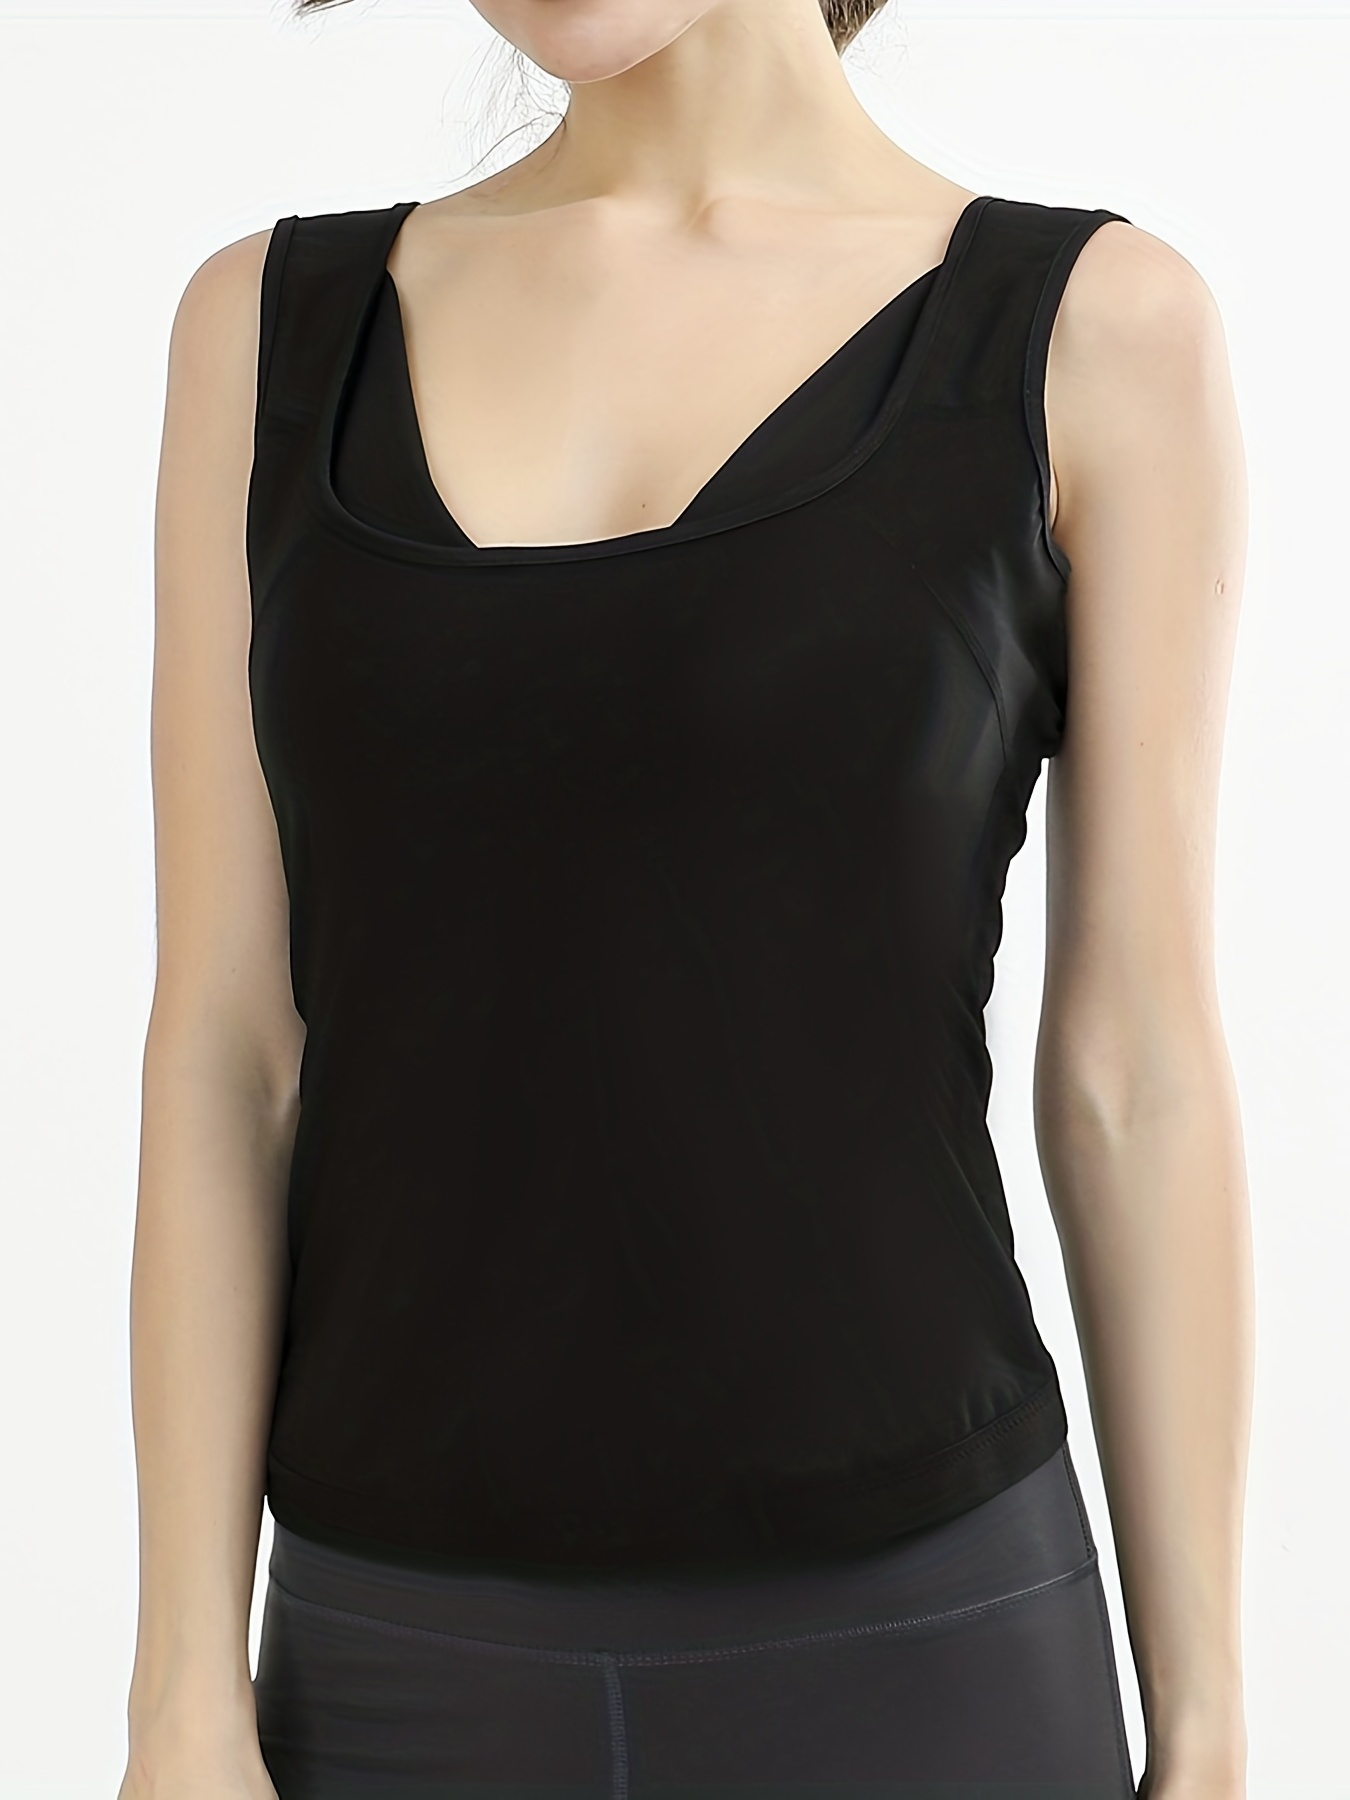 Simple Solid Shaping Tank Tops, Tummy Control Compression Workout Top,  Women's Underwear & Shapewear